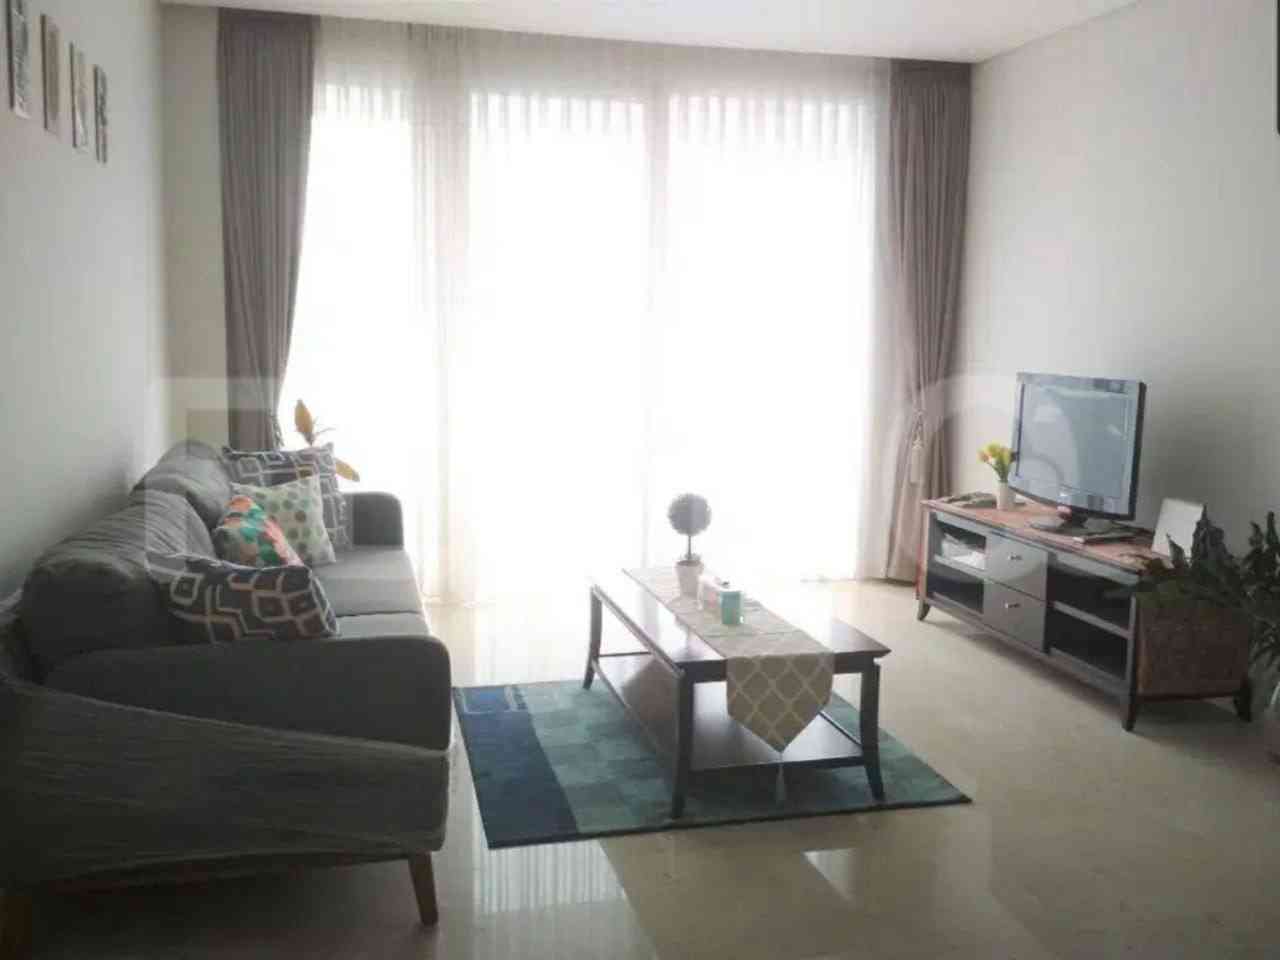 2 Bedroom on 18th Floor for Rent in The Grove Apartment - fkue65 4